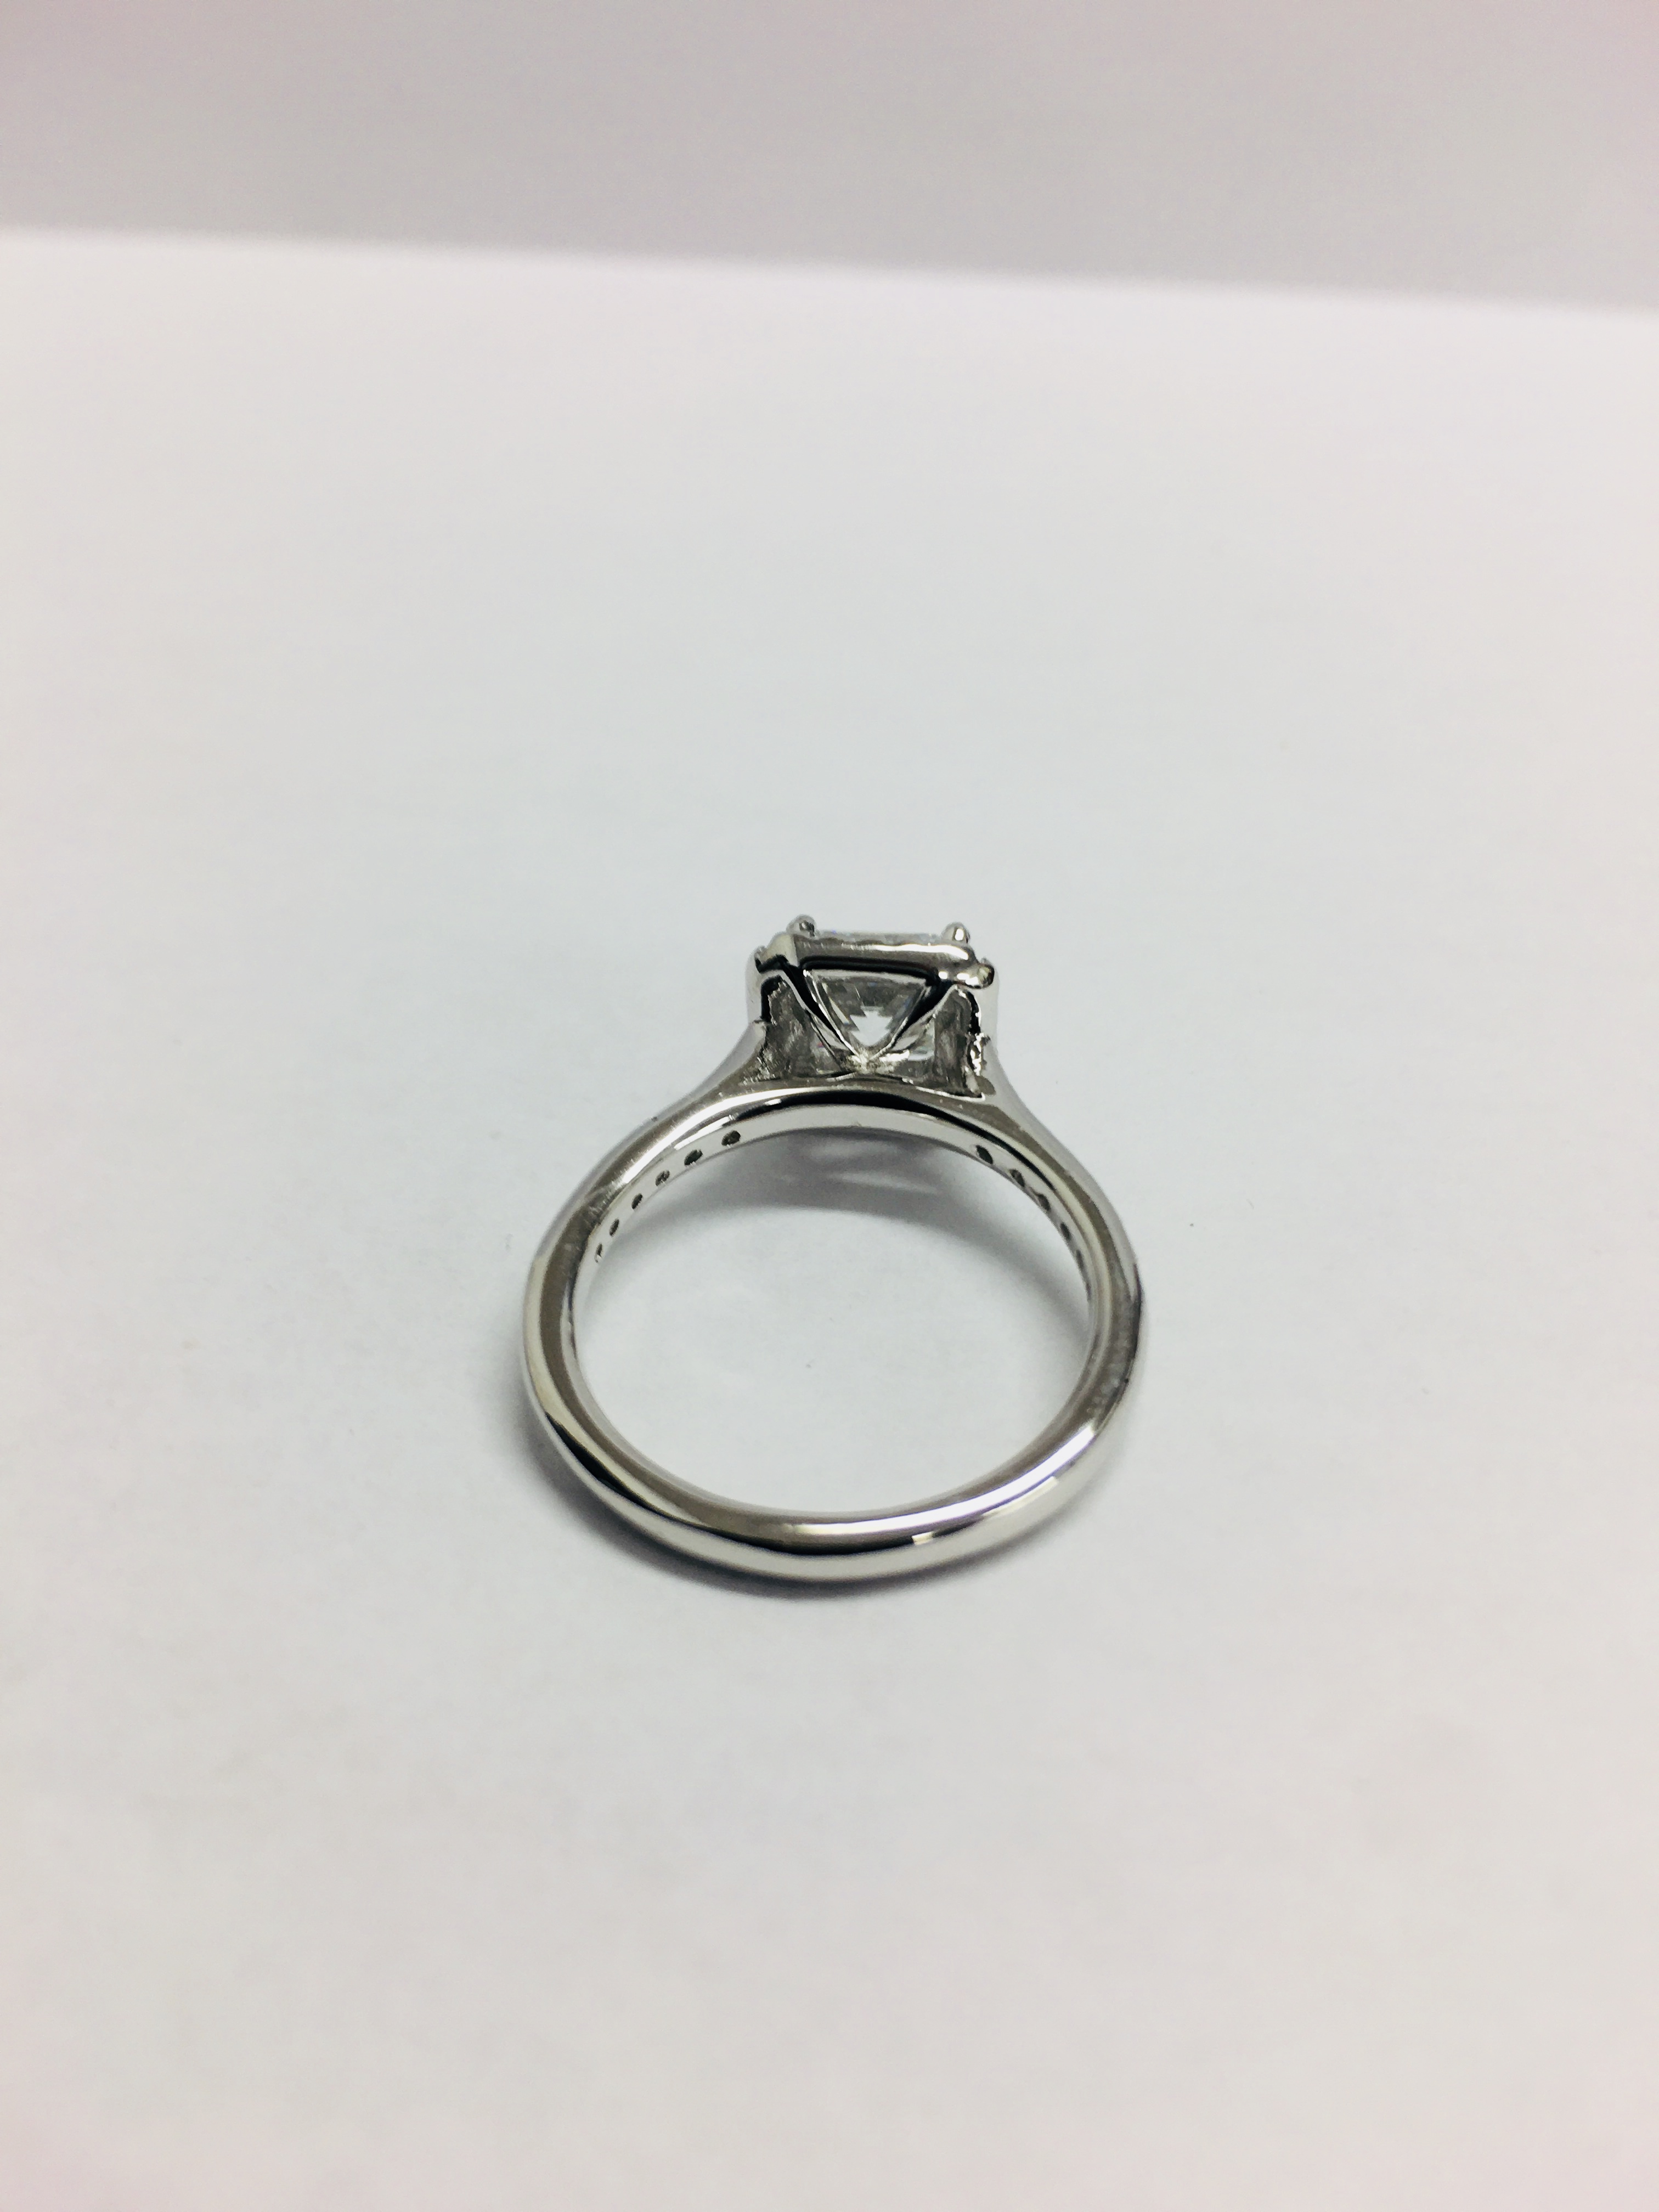 1.00CTct diamond set solitaire ring with a princess cut diamond - Image 4 of 6